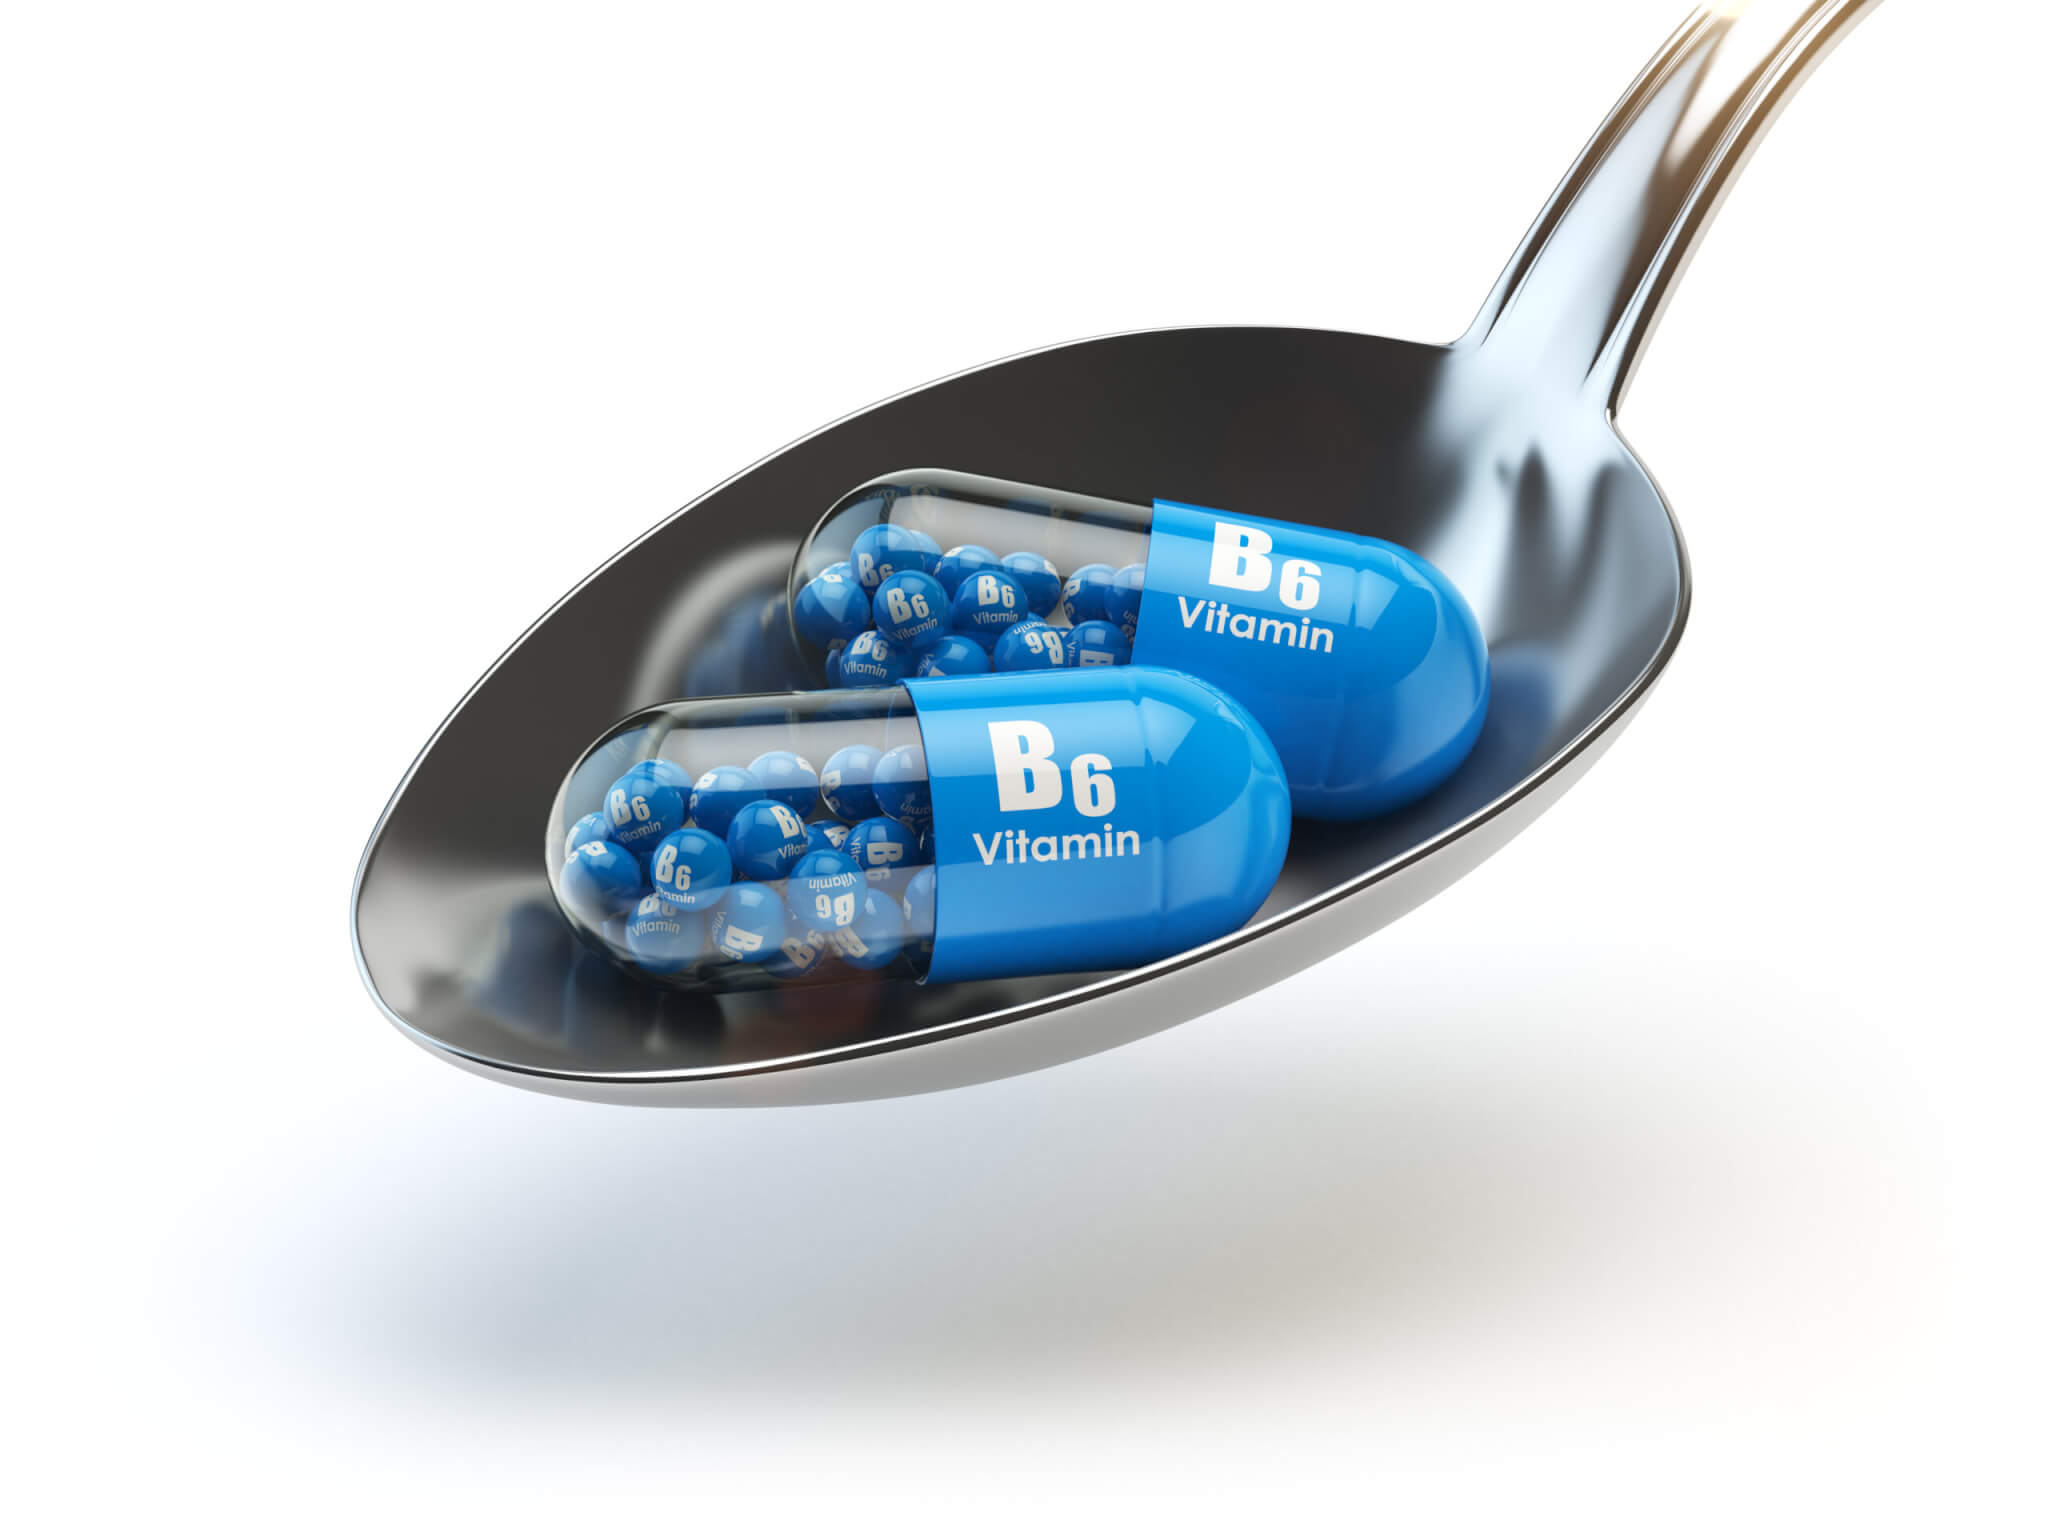 Vitamin B6 supplements in high doses can calm anxiety, depression